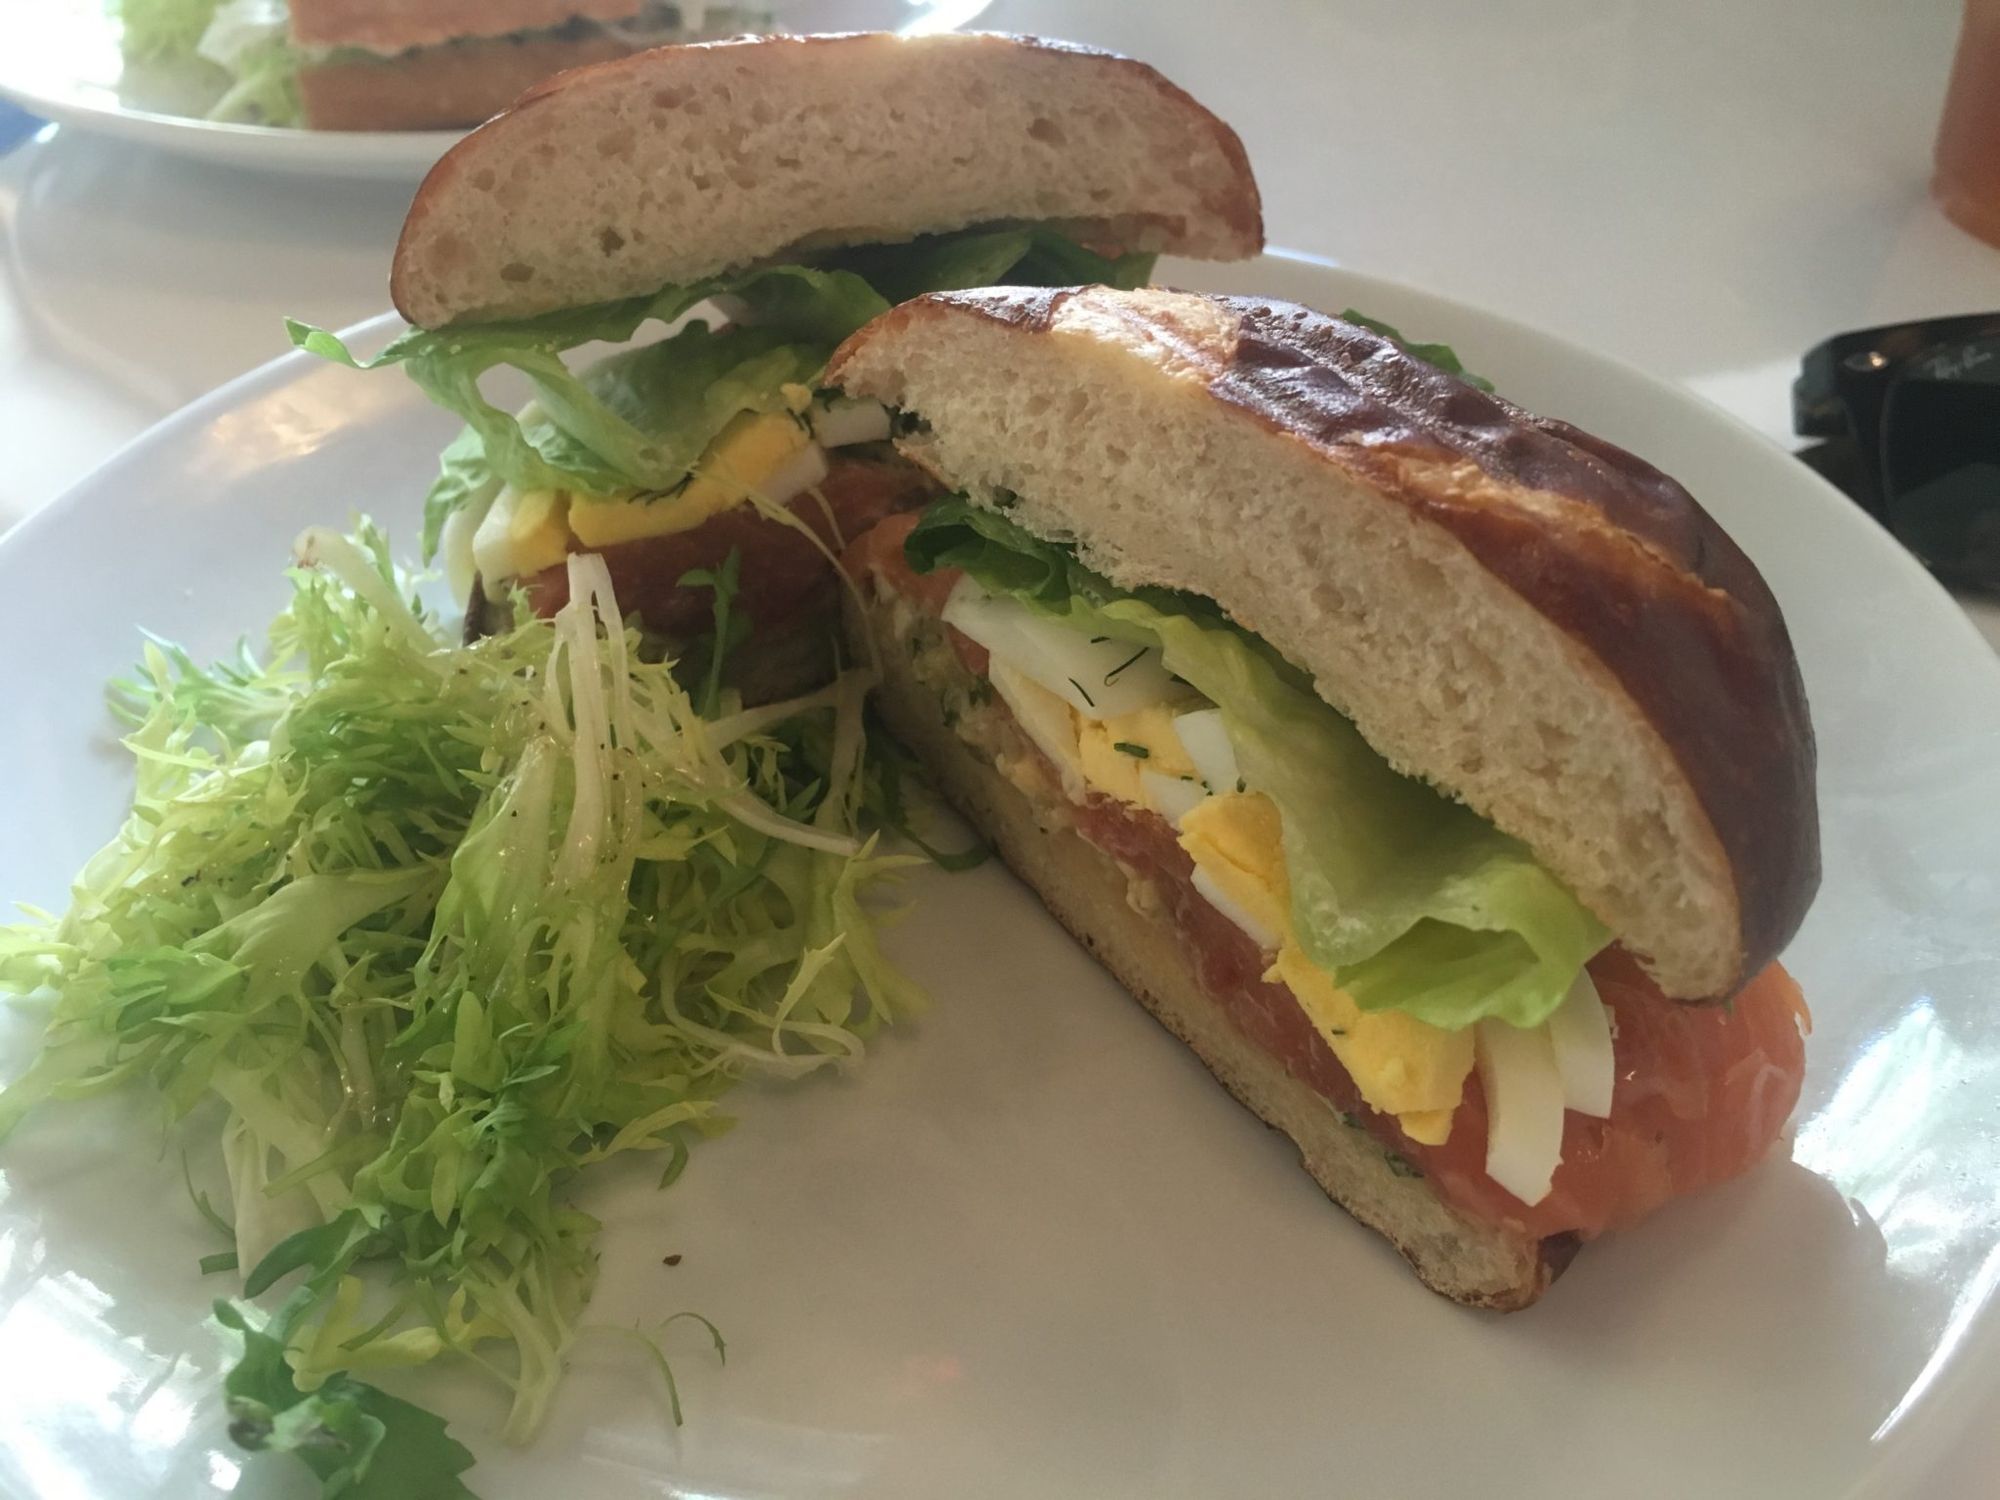 French-Inspired Fare At Parade Cafe, ‘The Best New Lunch Spot Around’